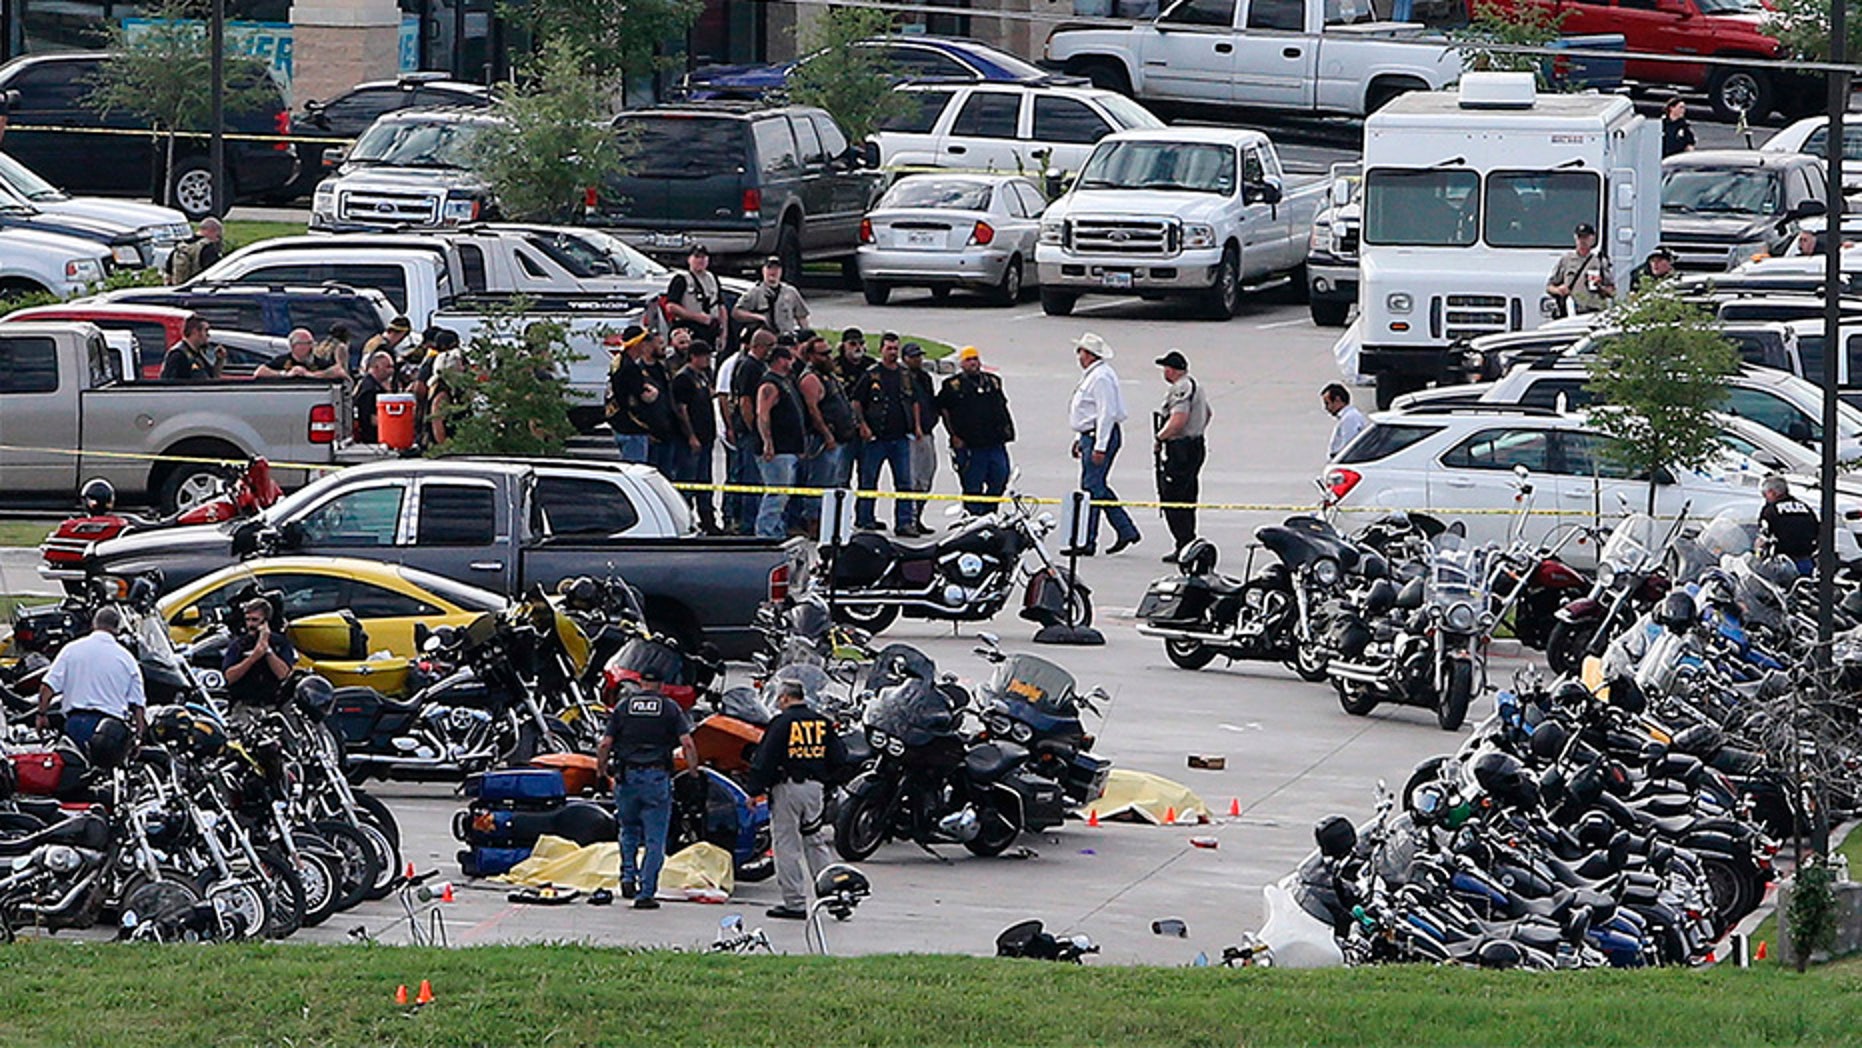 3 bikers hit with murder charges following shootout at Texas restaurant